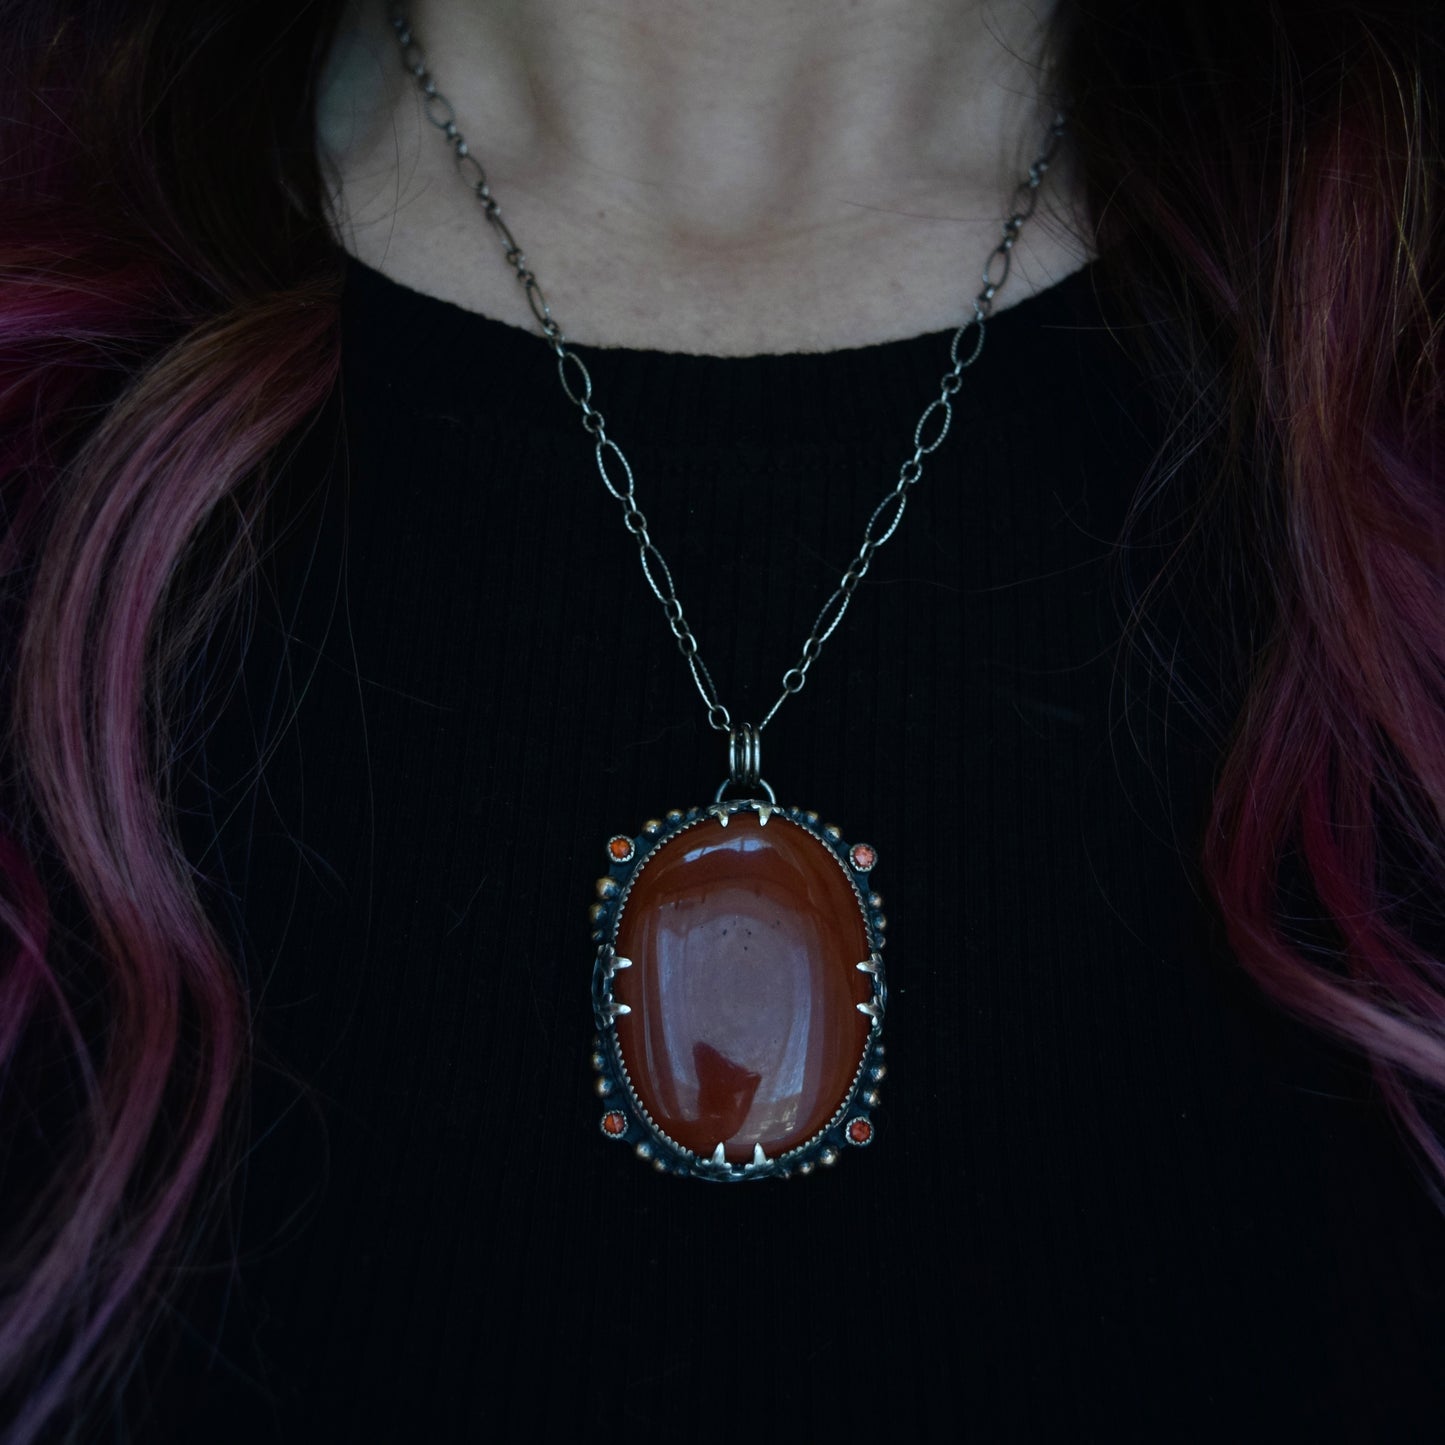 The Lion House Worry Stone Pendant with Red Jasper, Garnet, and Yellow Gold Fill